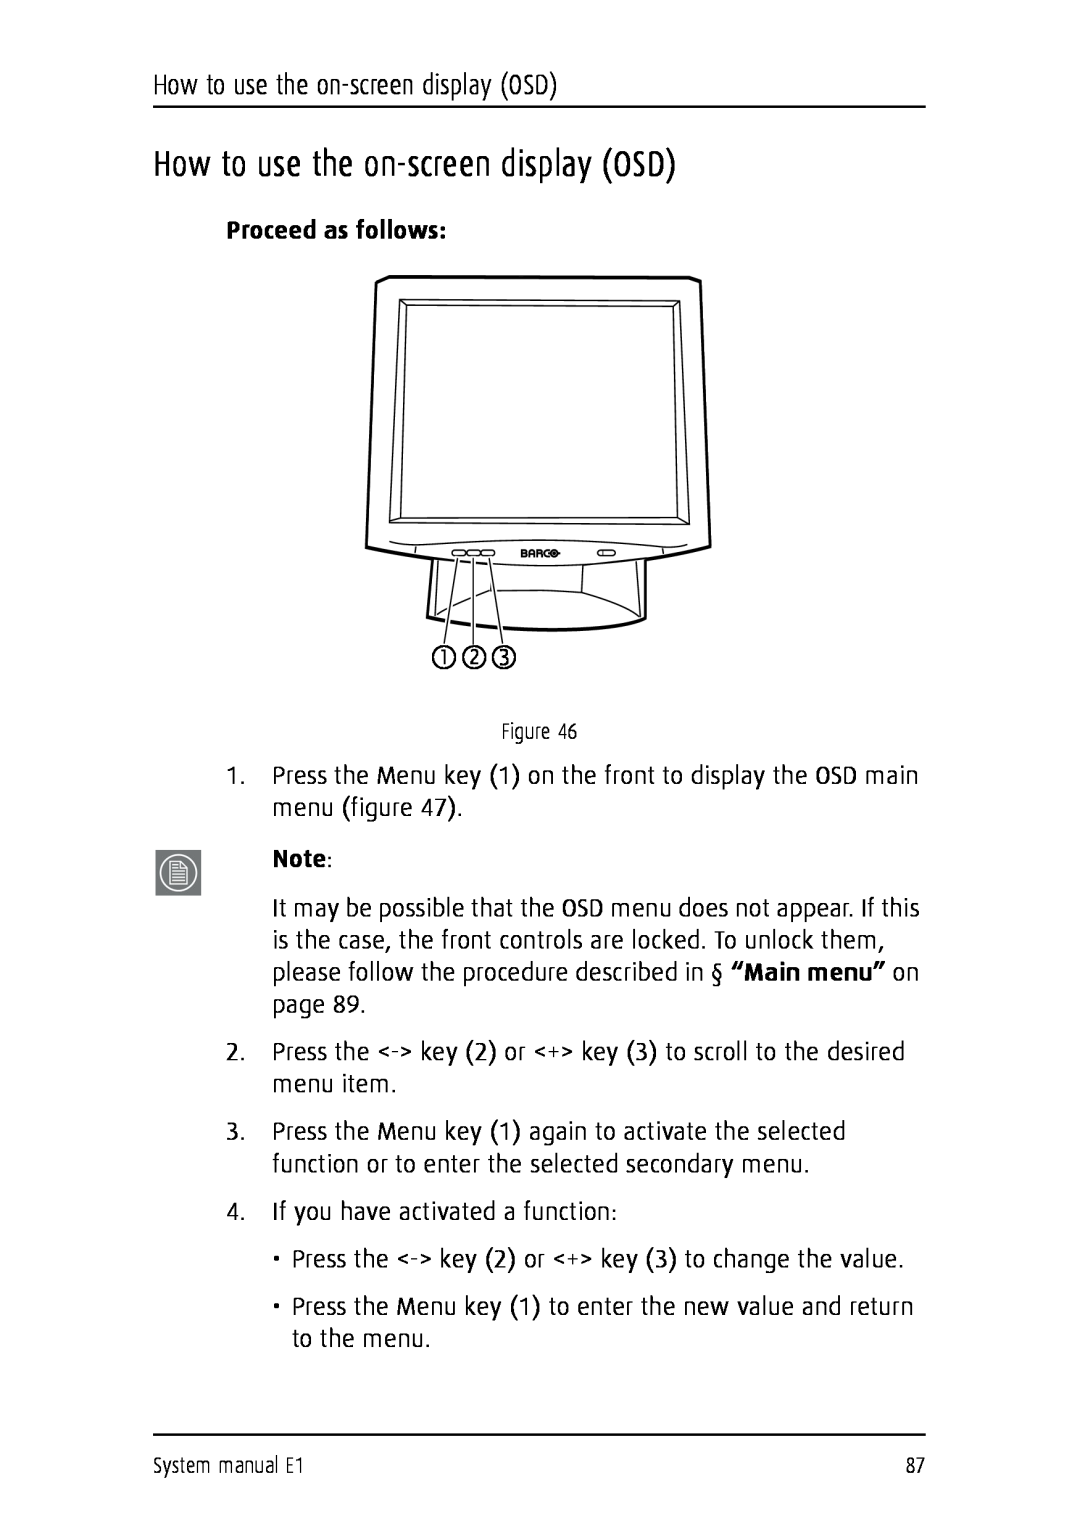 Barco E1 manual How to use the on-screen display OSD, Proceed as follows 